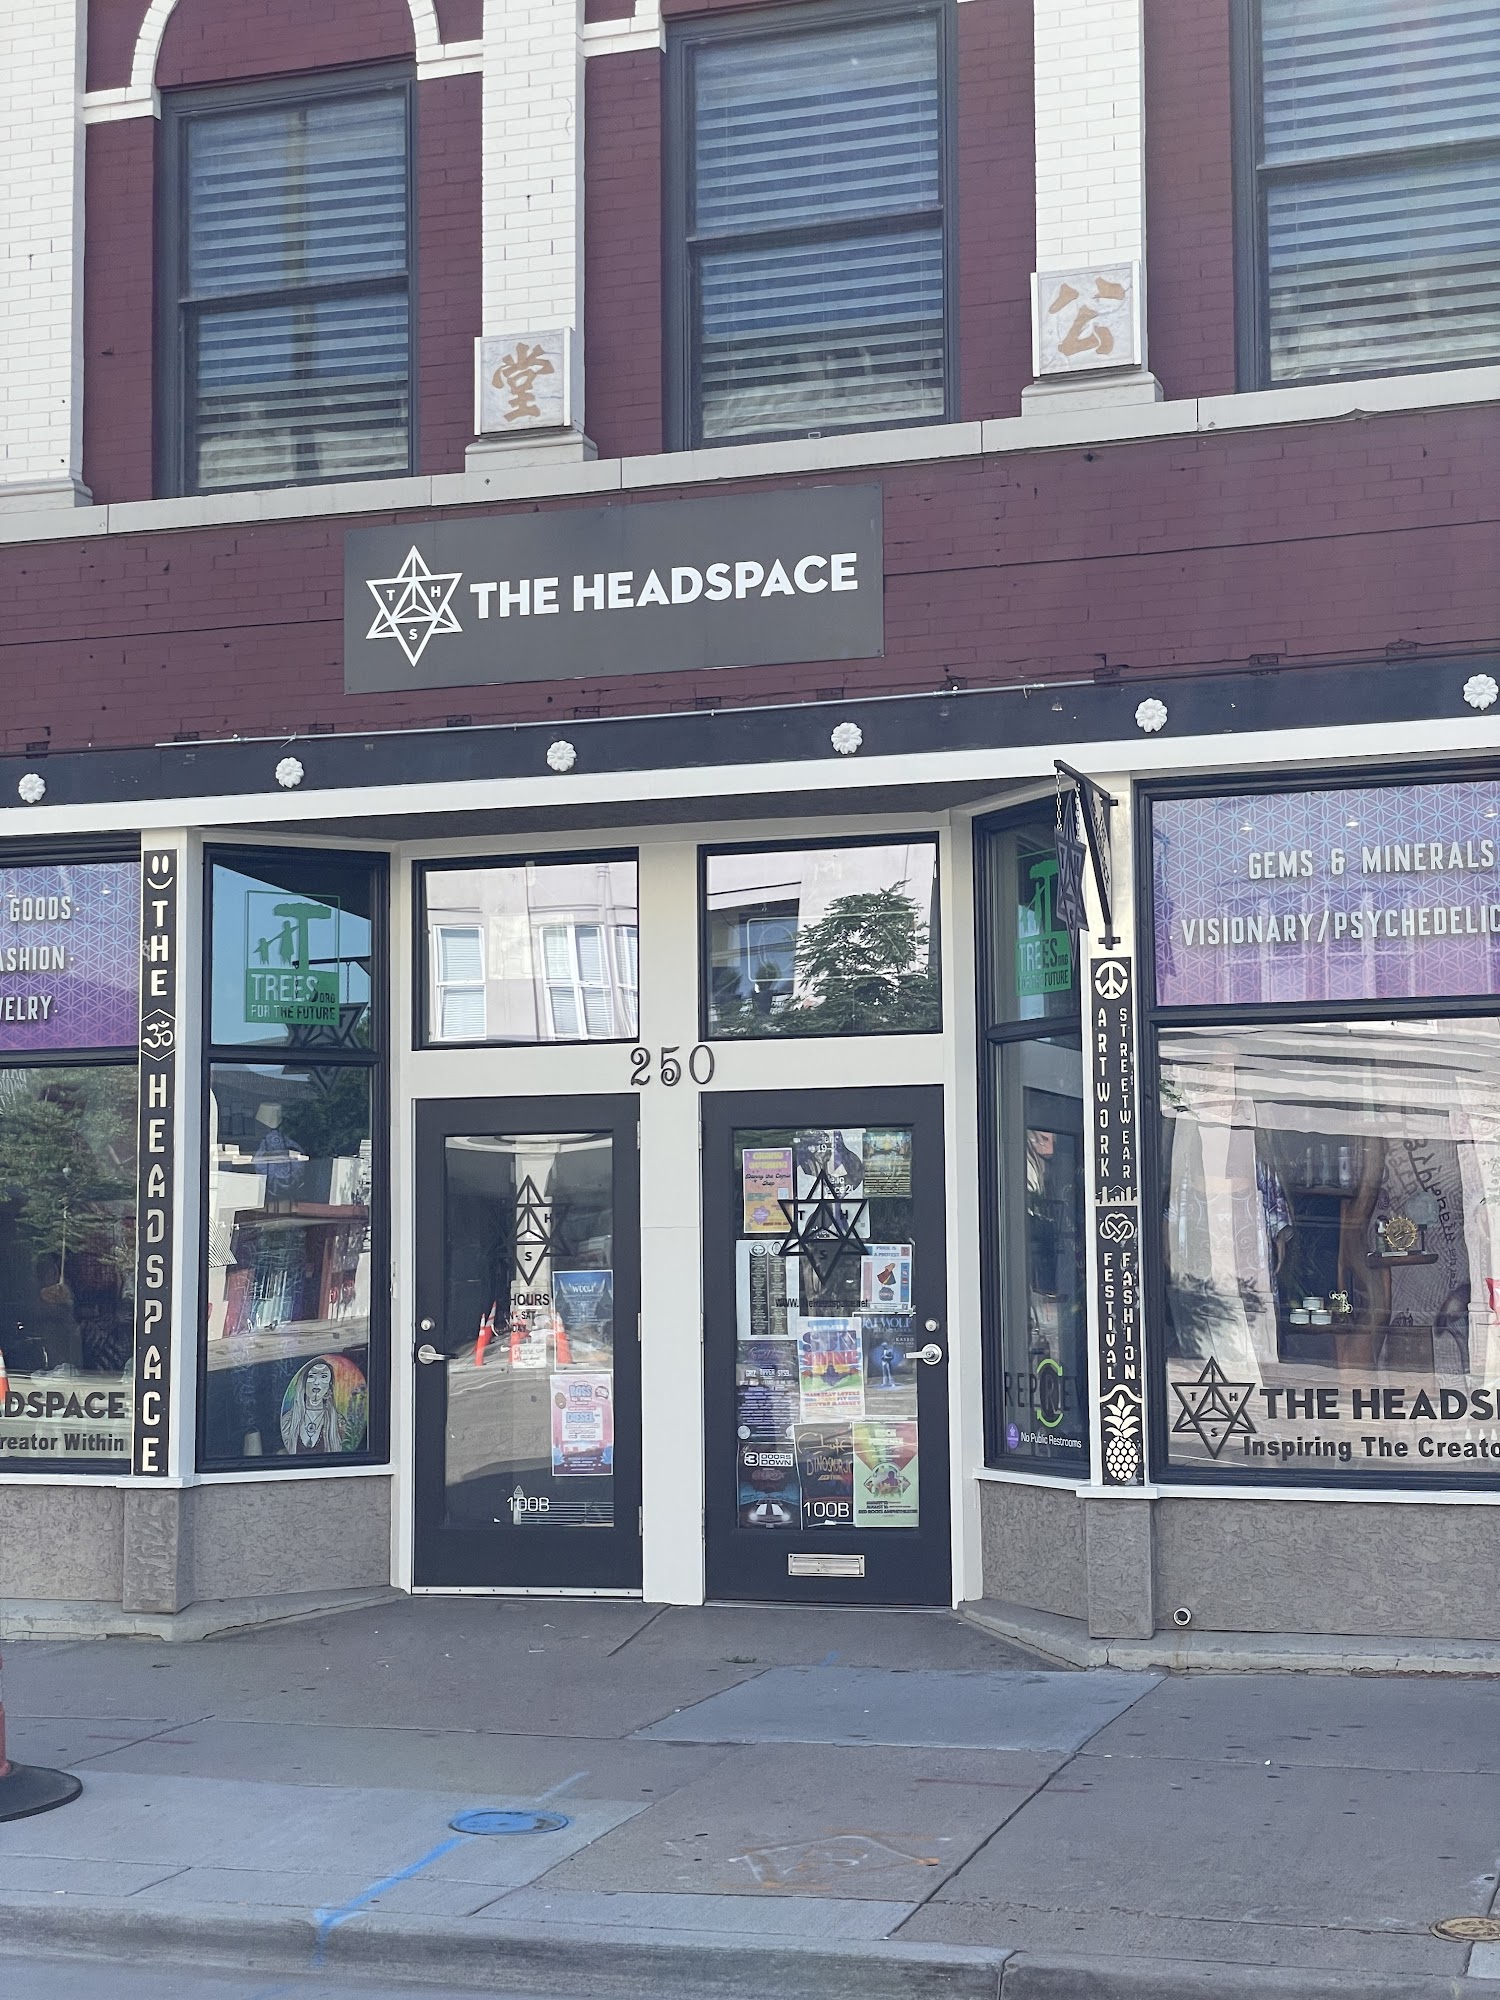 The Headspace - Rock Shop, Clothing, Jewelry & Gifts